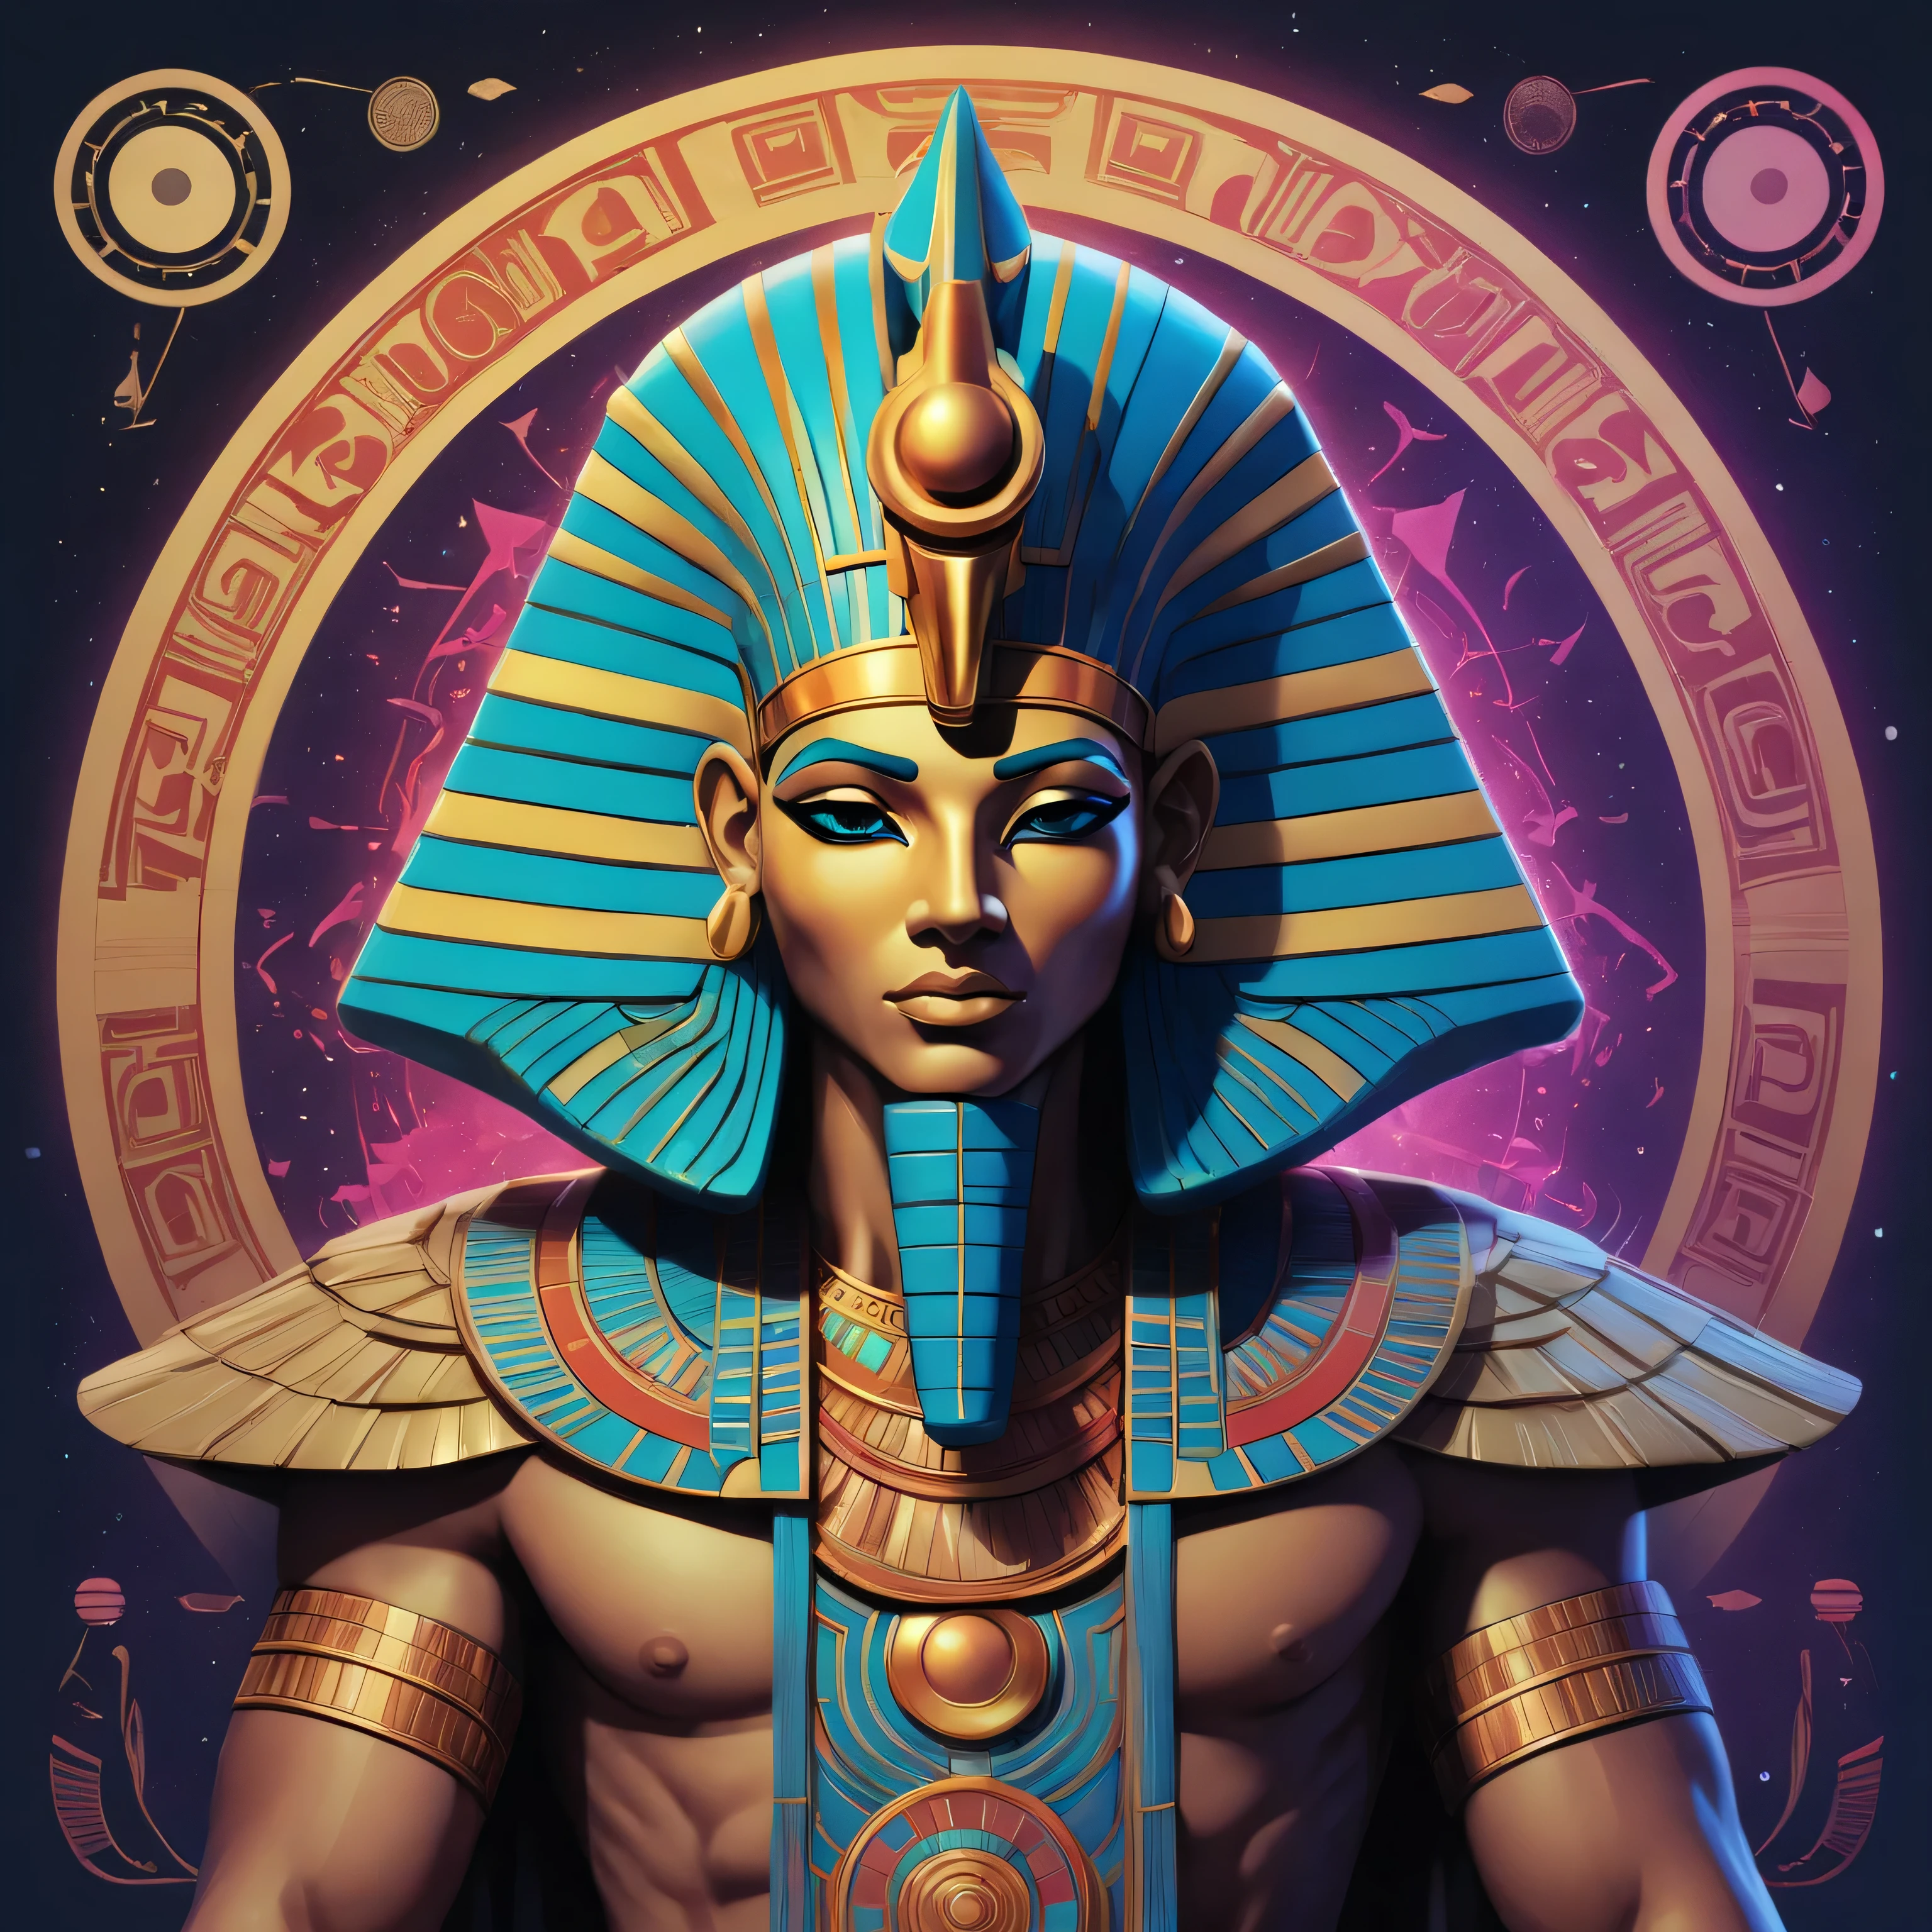 In a contemporary Digital Art design, create a vibrant Pop Art interpretation of Heka, the ancient Egyptian god of magic. Blend anime and comic book aesthetics with bold lines, luminous colors, and mesmerizing bioluminescent accents. Illustrate Heka's transcendent form with intricate geometric patterns inspired by Egyptian hieroglyphs, showcasing his ability to bend reality and manipulate the elements. Express his distinct attribute of change and transformation with drunken perspectival shifts, adorned in a unique, storied fabric, reminiscent of sacred Egyptian tapestries, embodying a celestial godlike presence while rooted in rich cultural history.